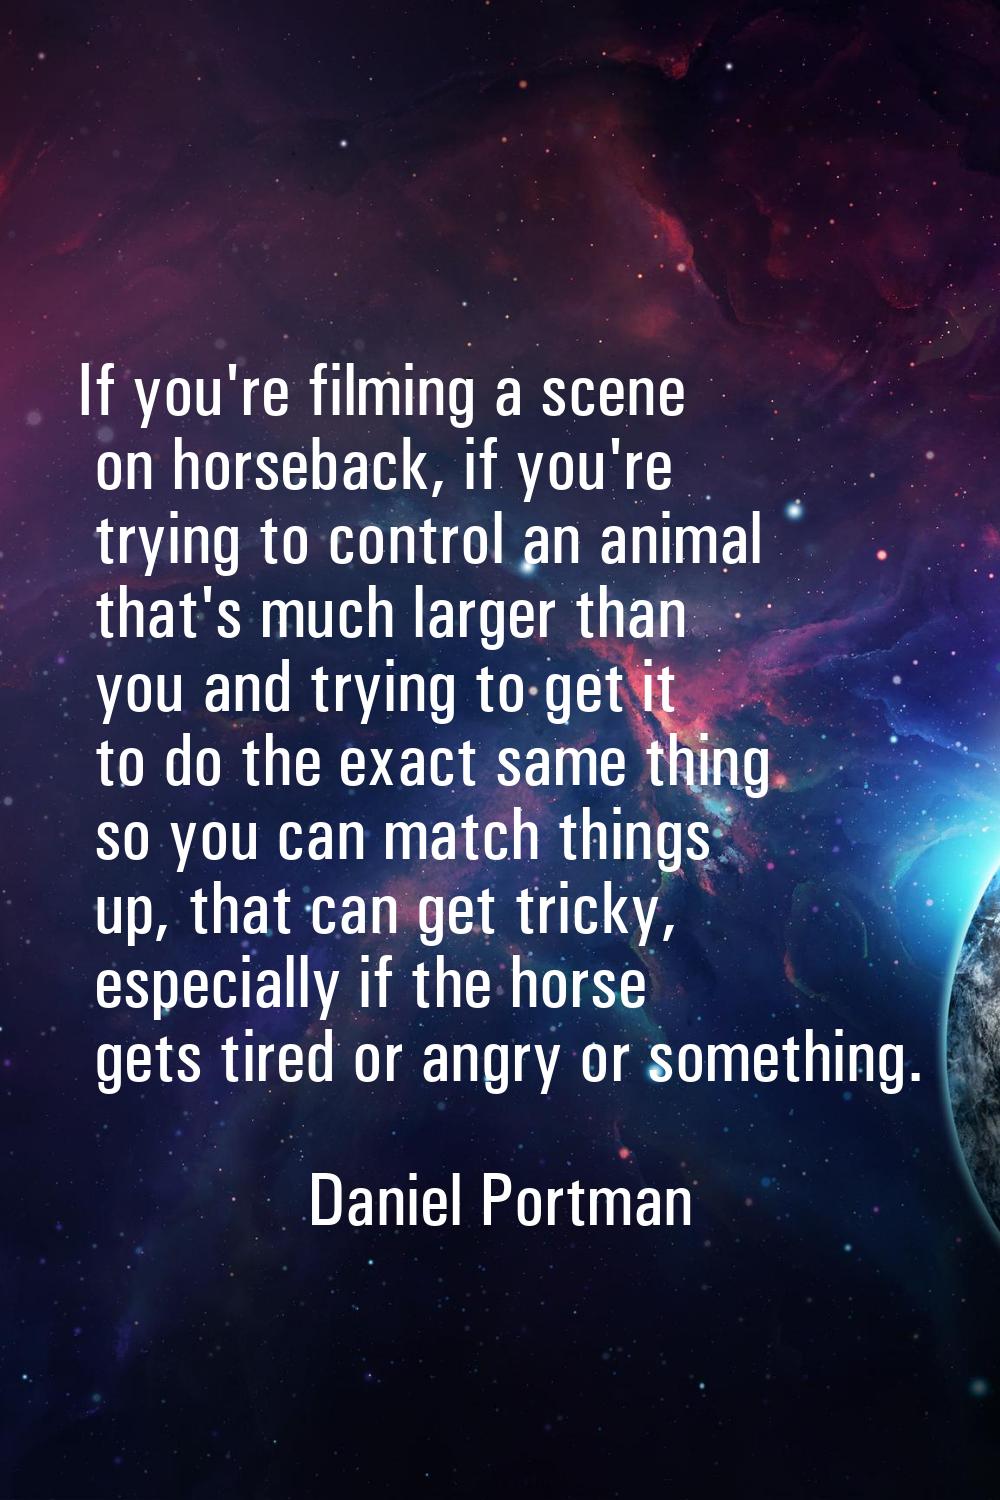 If you're filming a scene on horseback, if you're trying to control an animal that's much larger th